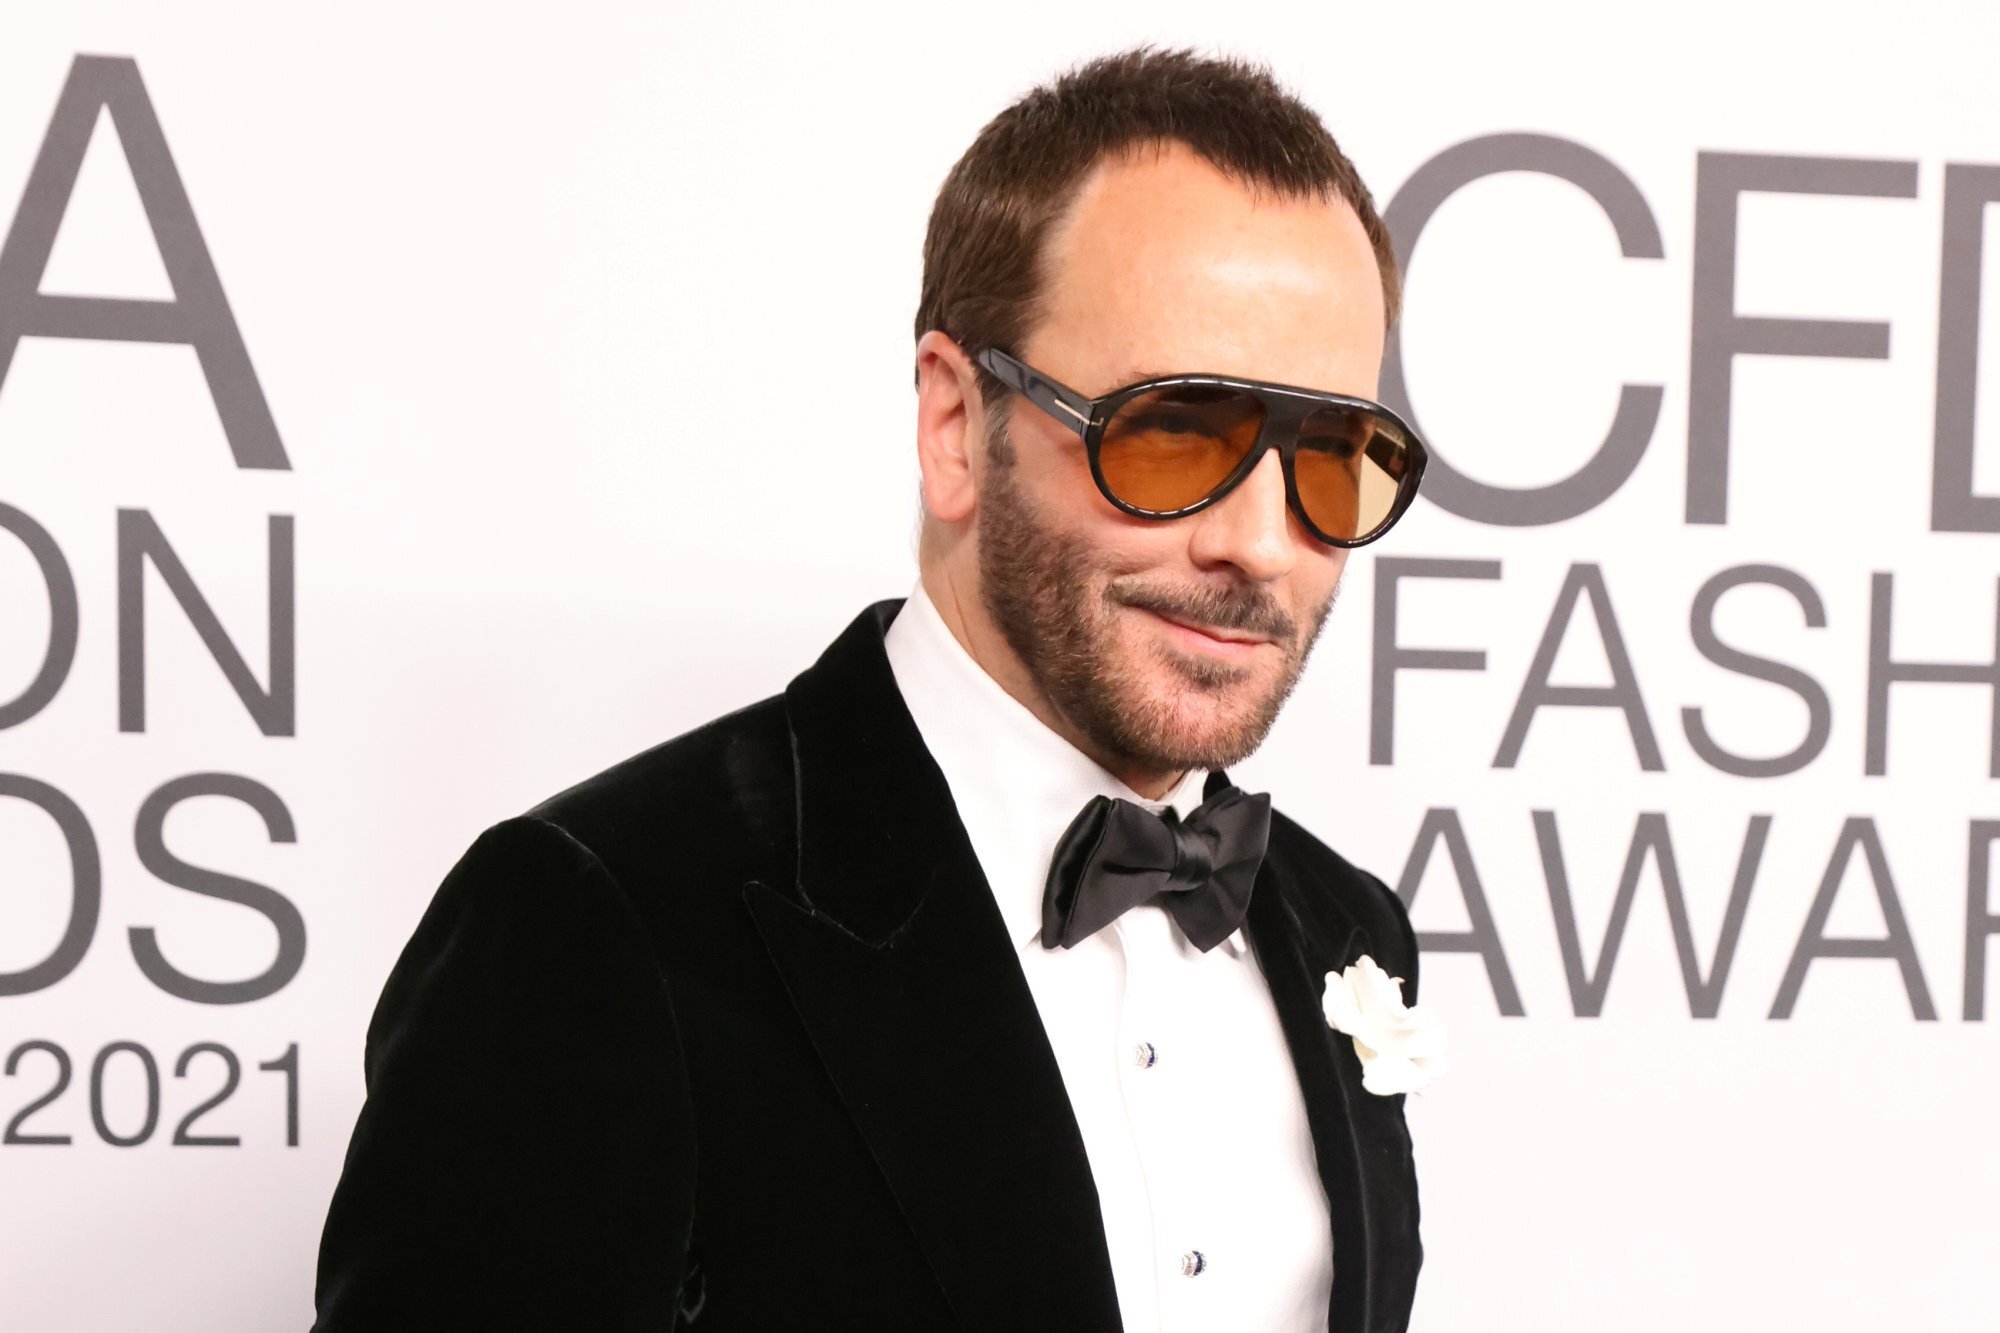 Tom Ford poses on the carpet at the 2021 CFDA Awards in New York, on November 10. Photo: Reuters